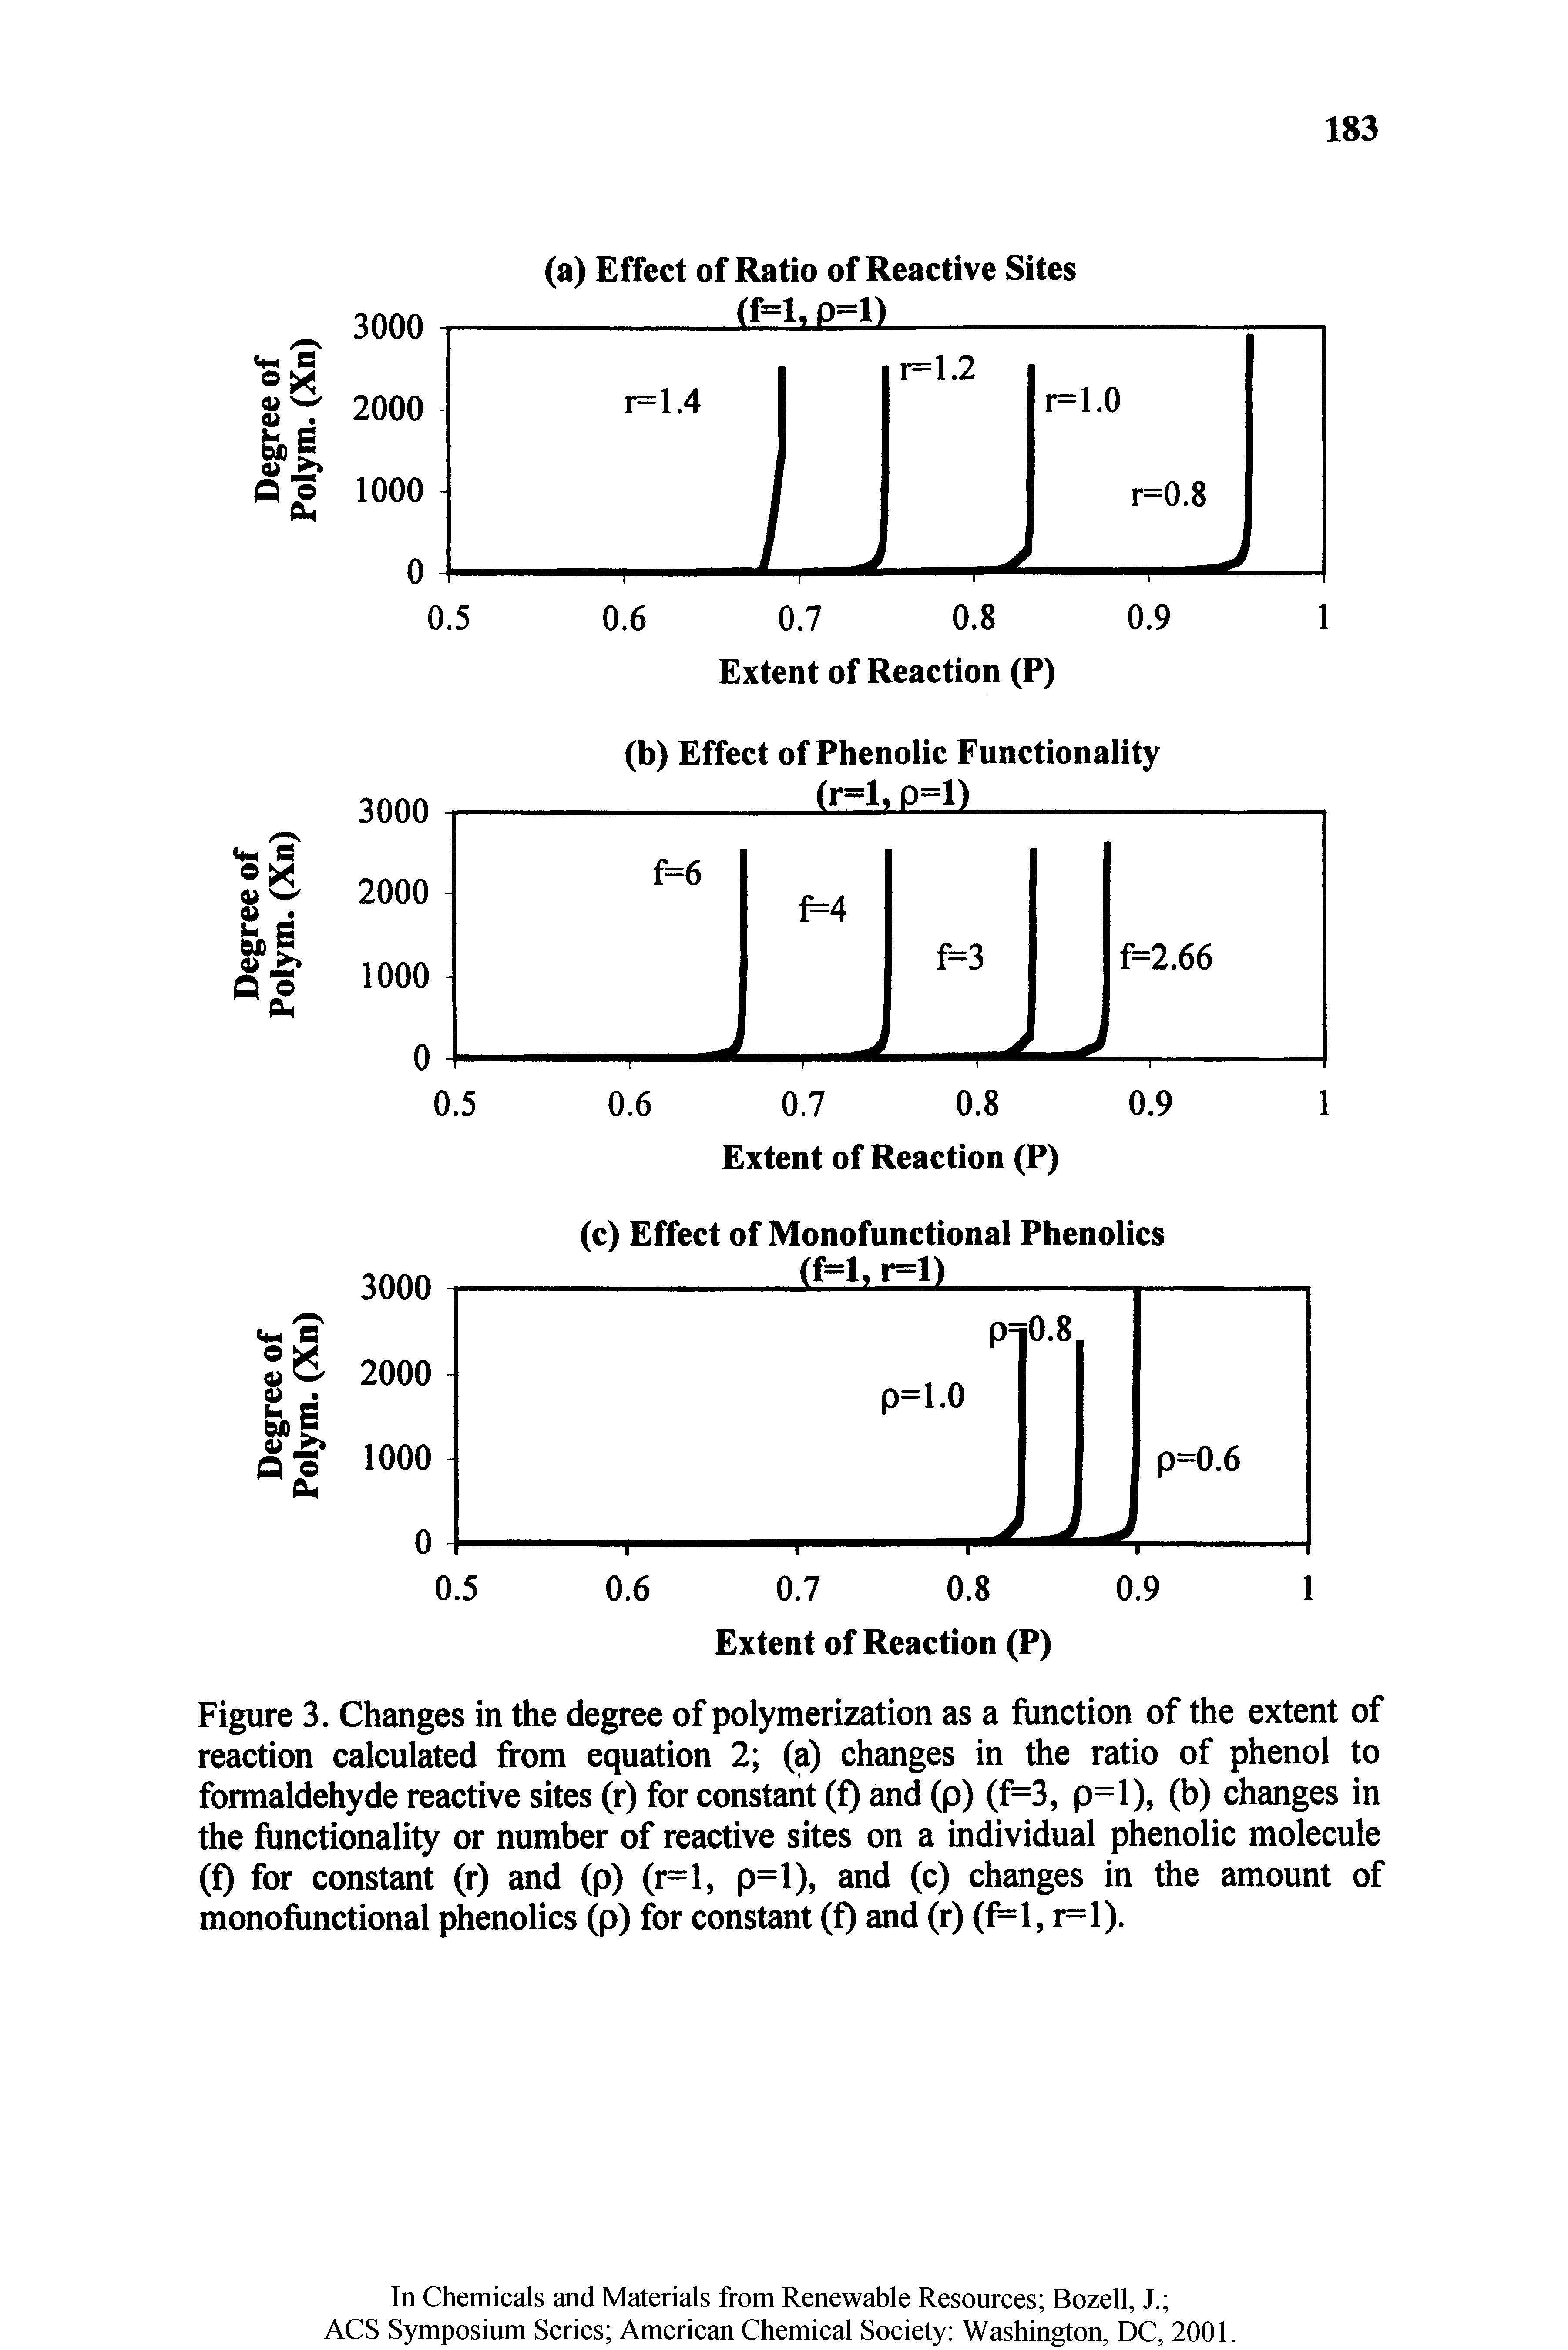 Figure 3. Changes in the degree of polymerization as a function of the extent of reaction calculated from equation 2 (a) changes in the ratio of phenol to formaldehyde reactive sites (r) for constant (f) and (p) (f=3, p=l), (b) changes in the functionality or number of reactive sites on a individual phenolic molecule (f) for constant (r) and (p) (r=l, p=l), and (c) changes in the amount of monofunctional phenolics (p) for constant (f) and (r) (fr=l, r=l).